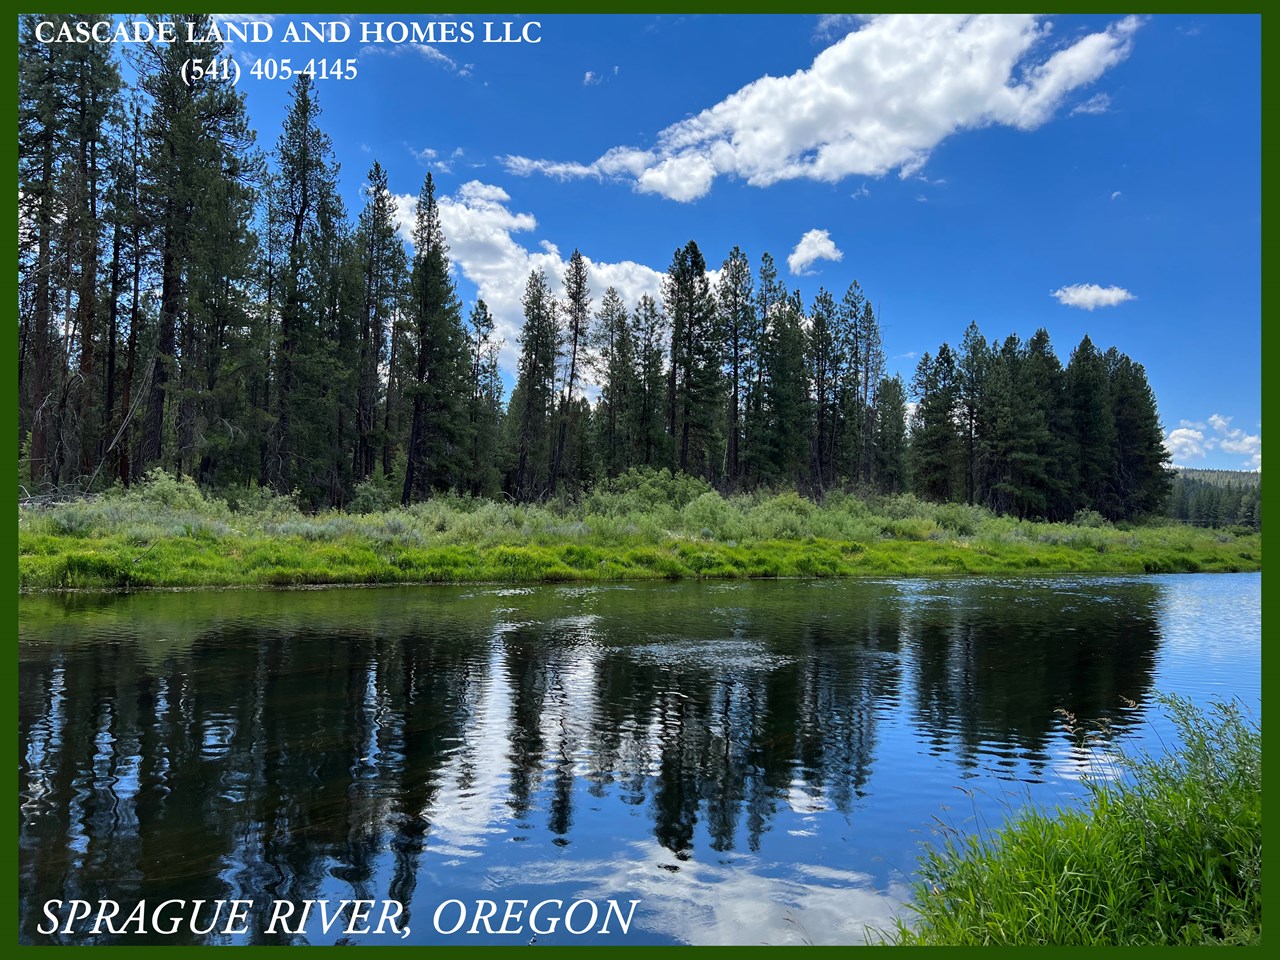 the sprague river near chiloquin, oregon. the nearby sprague river offers fishing, fly-fishing, rafting, boating, swimming, floating, or just watching the river peacefully flow by. if you love outdoor activities, this is the perfect place!